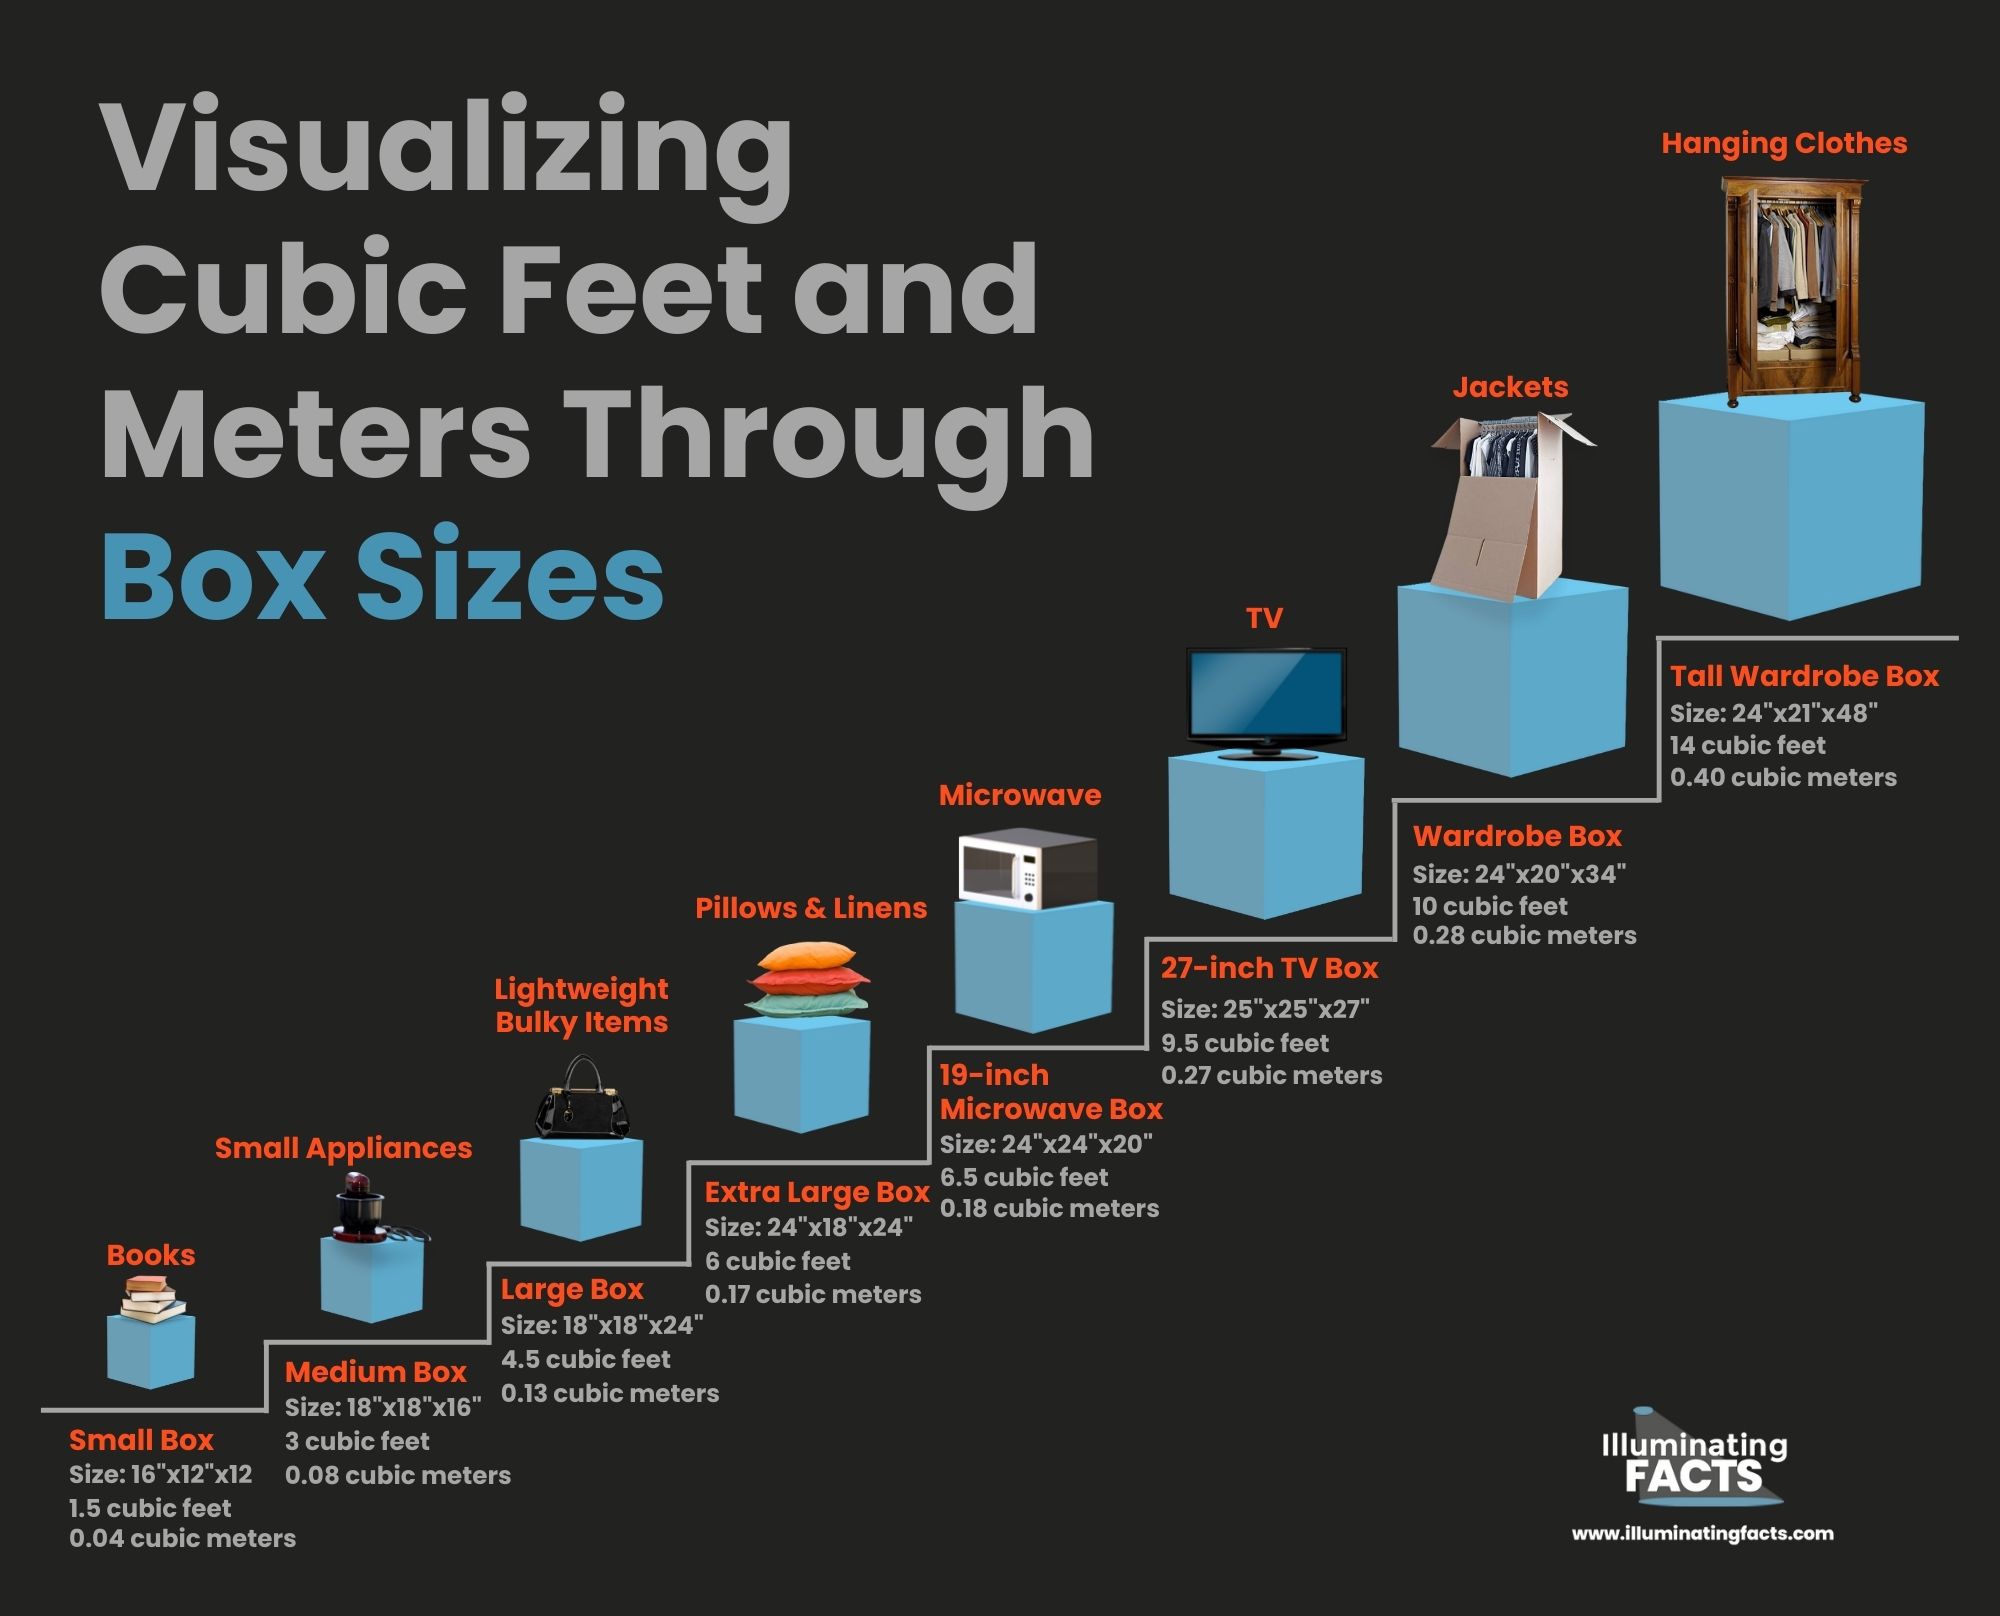 Visualizing Cubic Feet (and Meters) Through Box Sizes